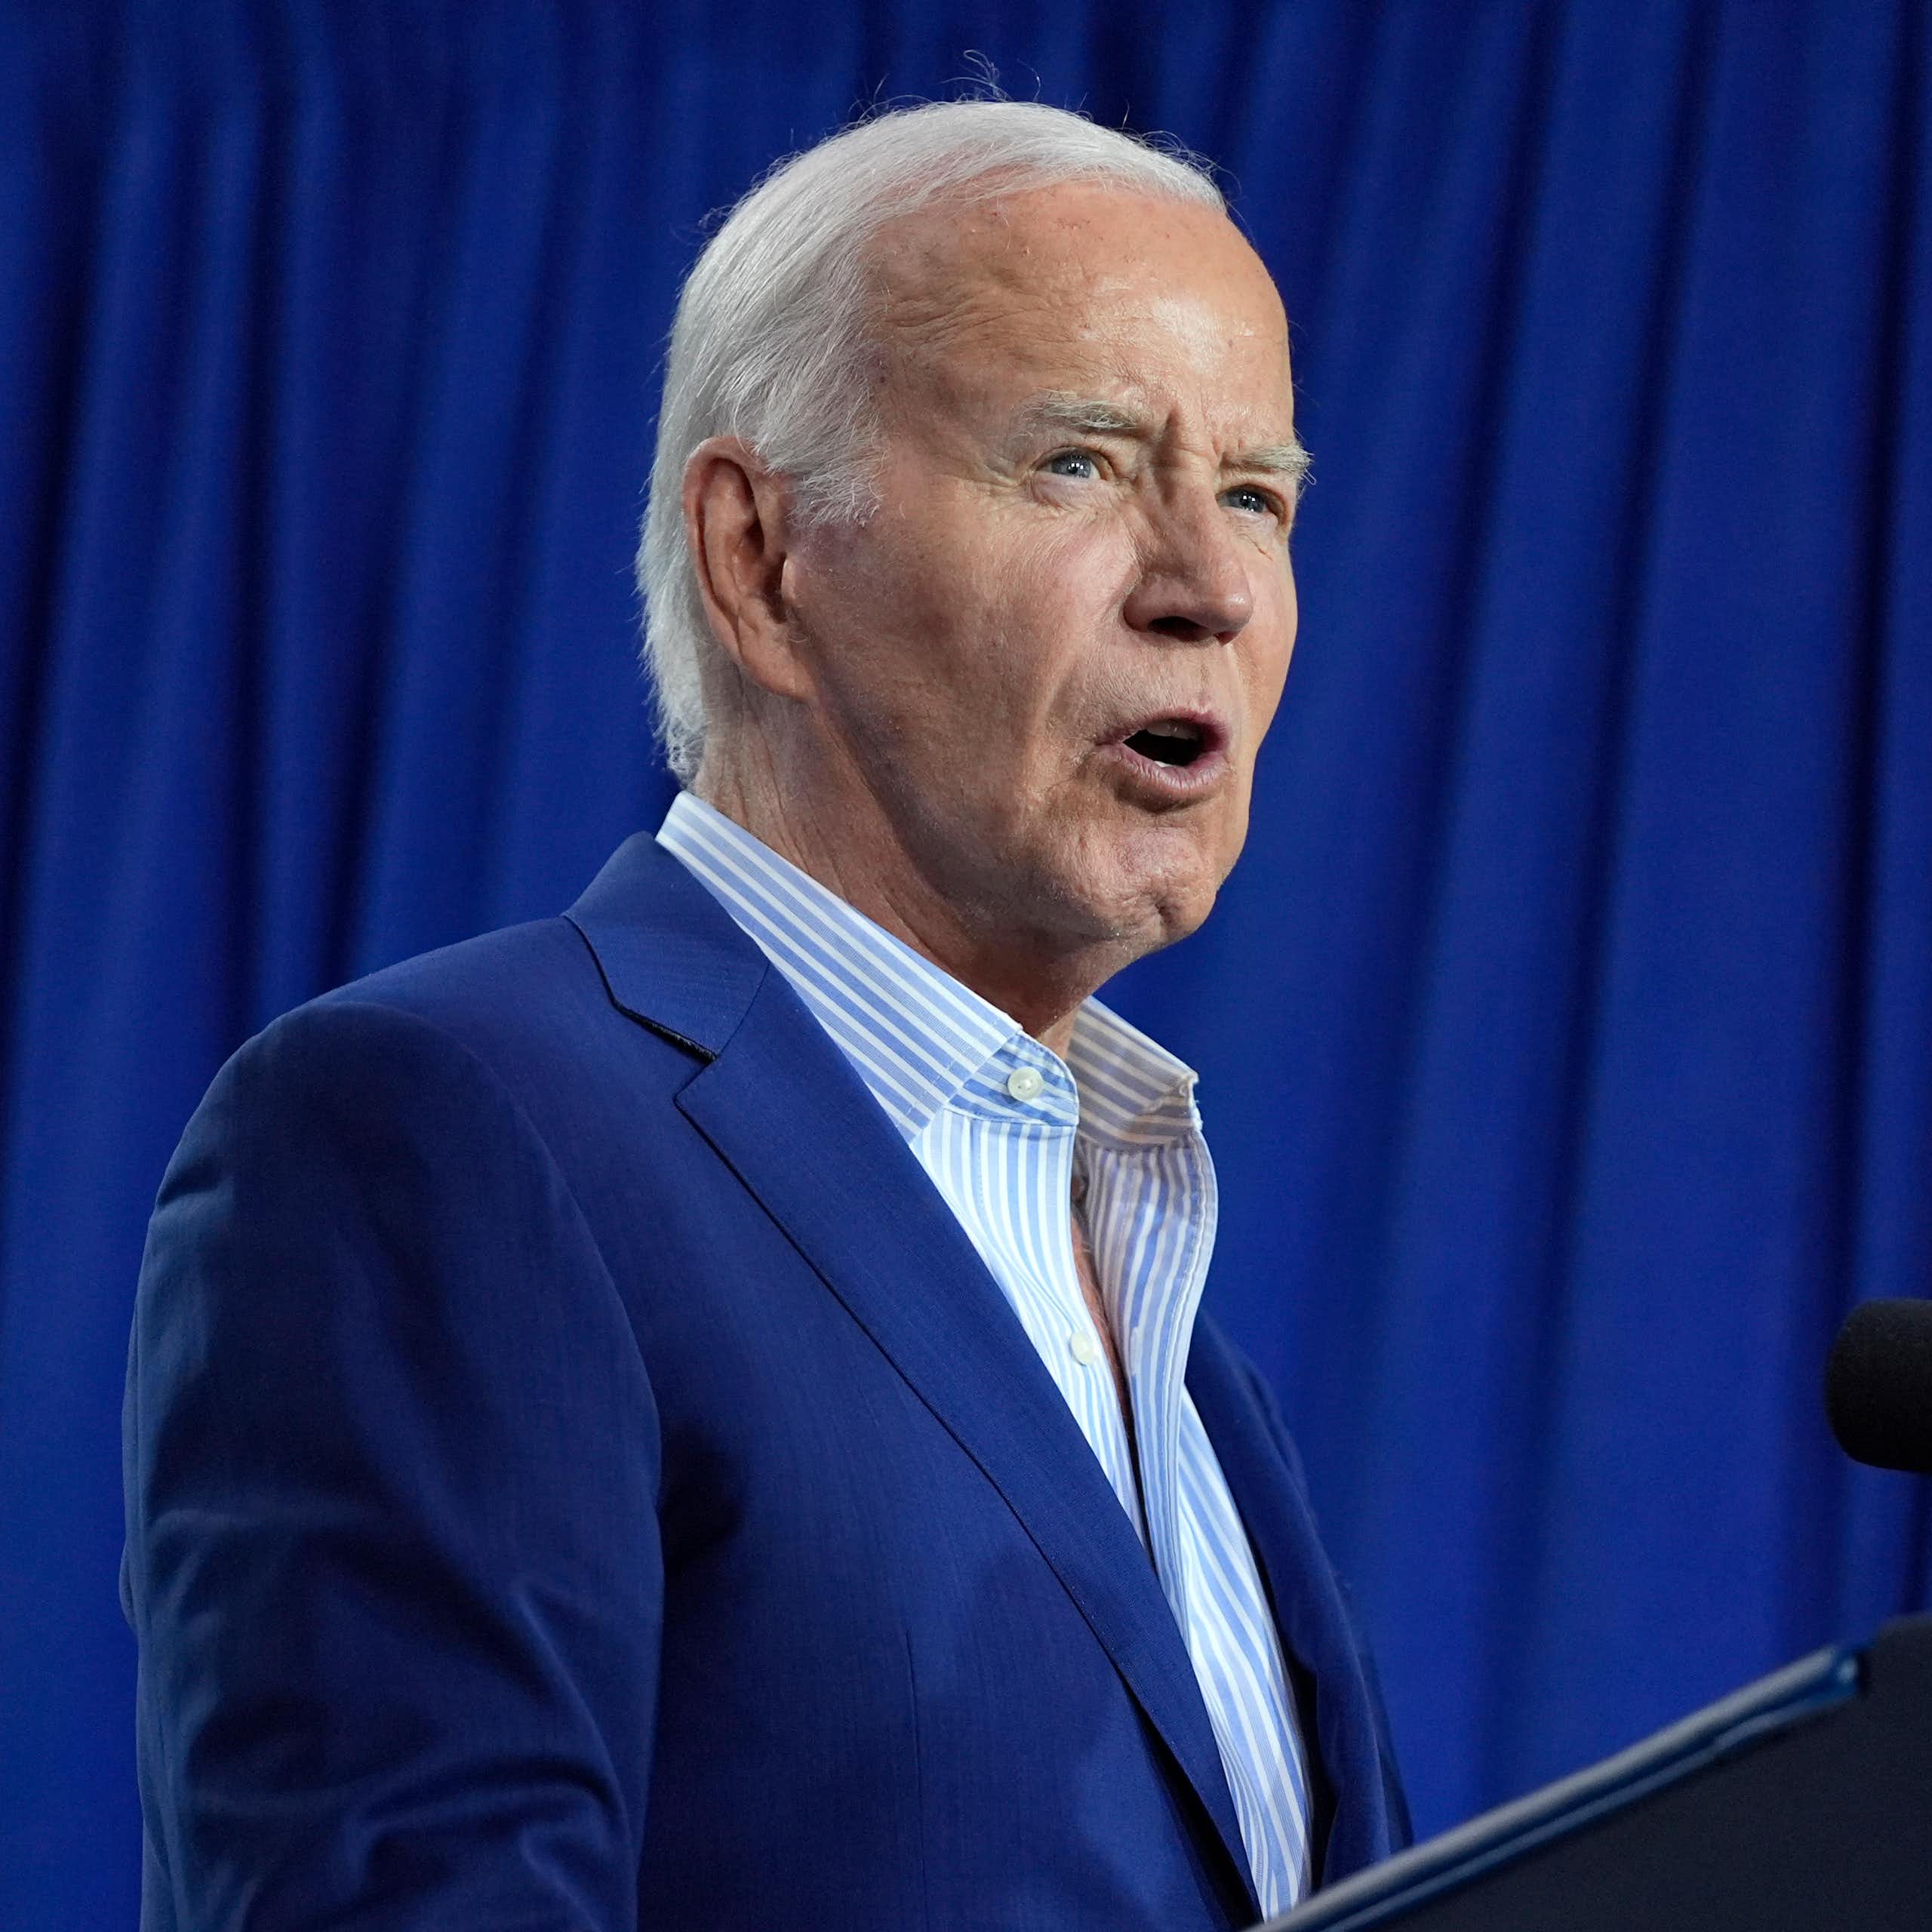 The most realistic way to replace Joe Biden as the Democratic presidential nominee – allow him a graceful exit